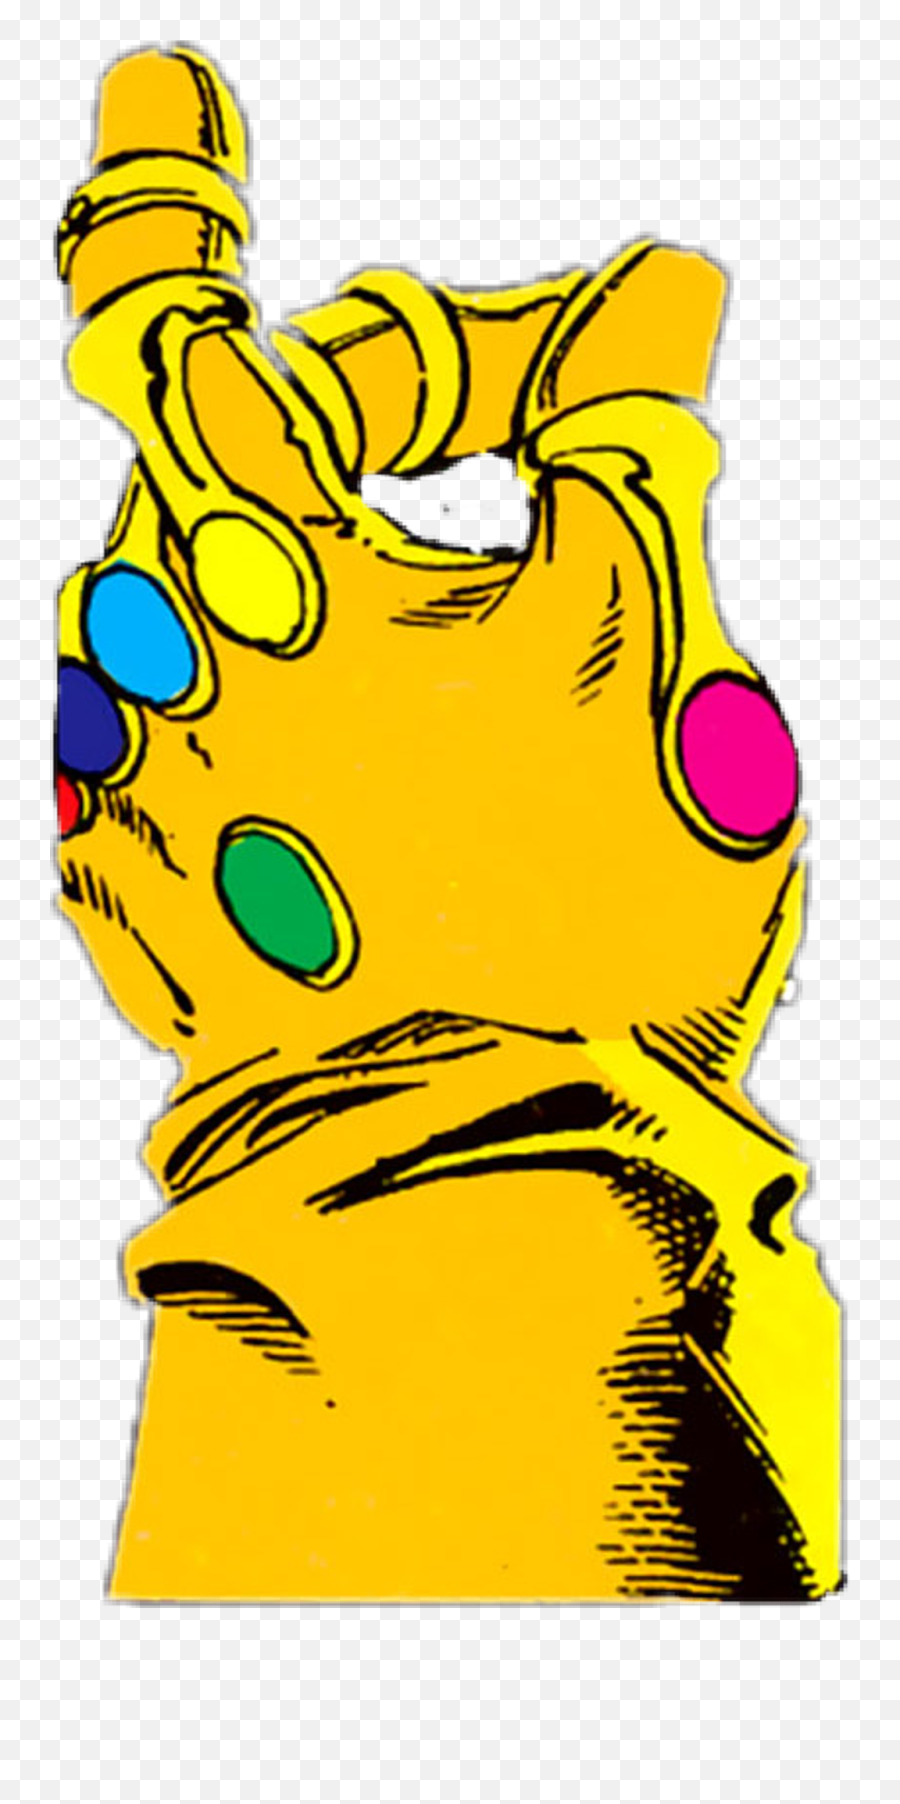 Thanos Infinity Gauntlet Snap - Infinity Gauntlet Snap Transparent Png,Snap Png